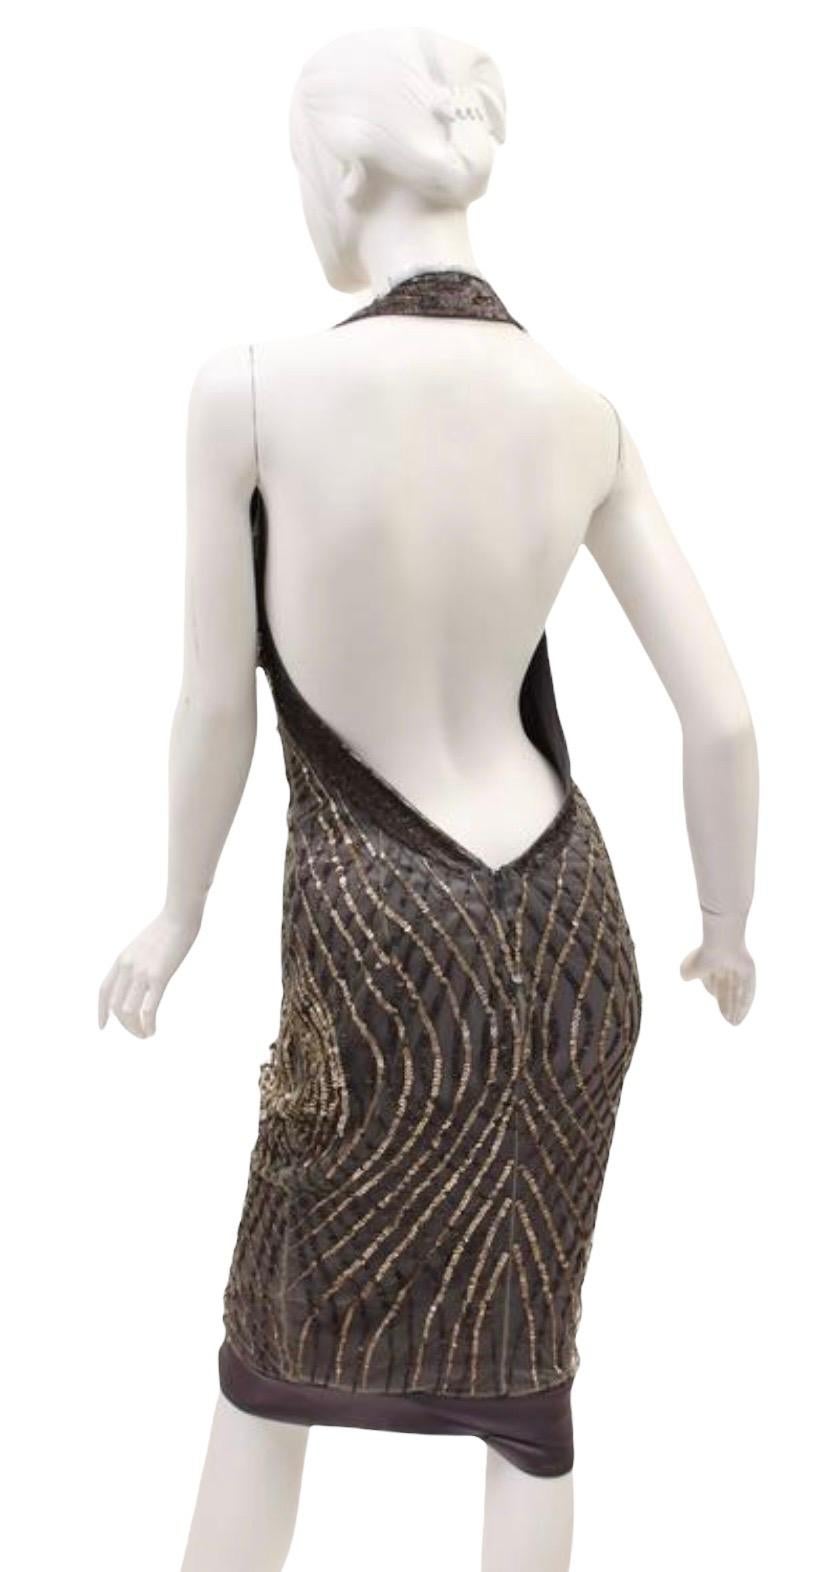 Women's F/W 2005 Vintage GUCCI Sequin Embellished Dress by Alessandra Facchinetti For Sale